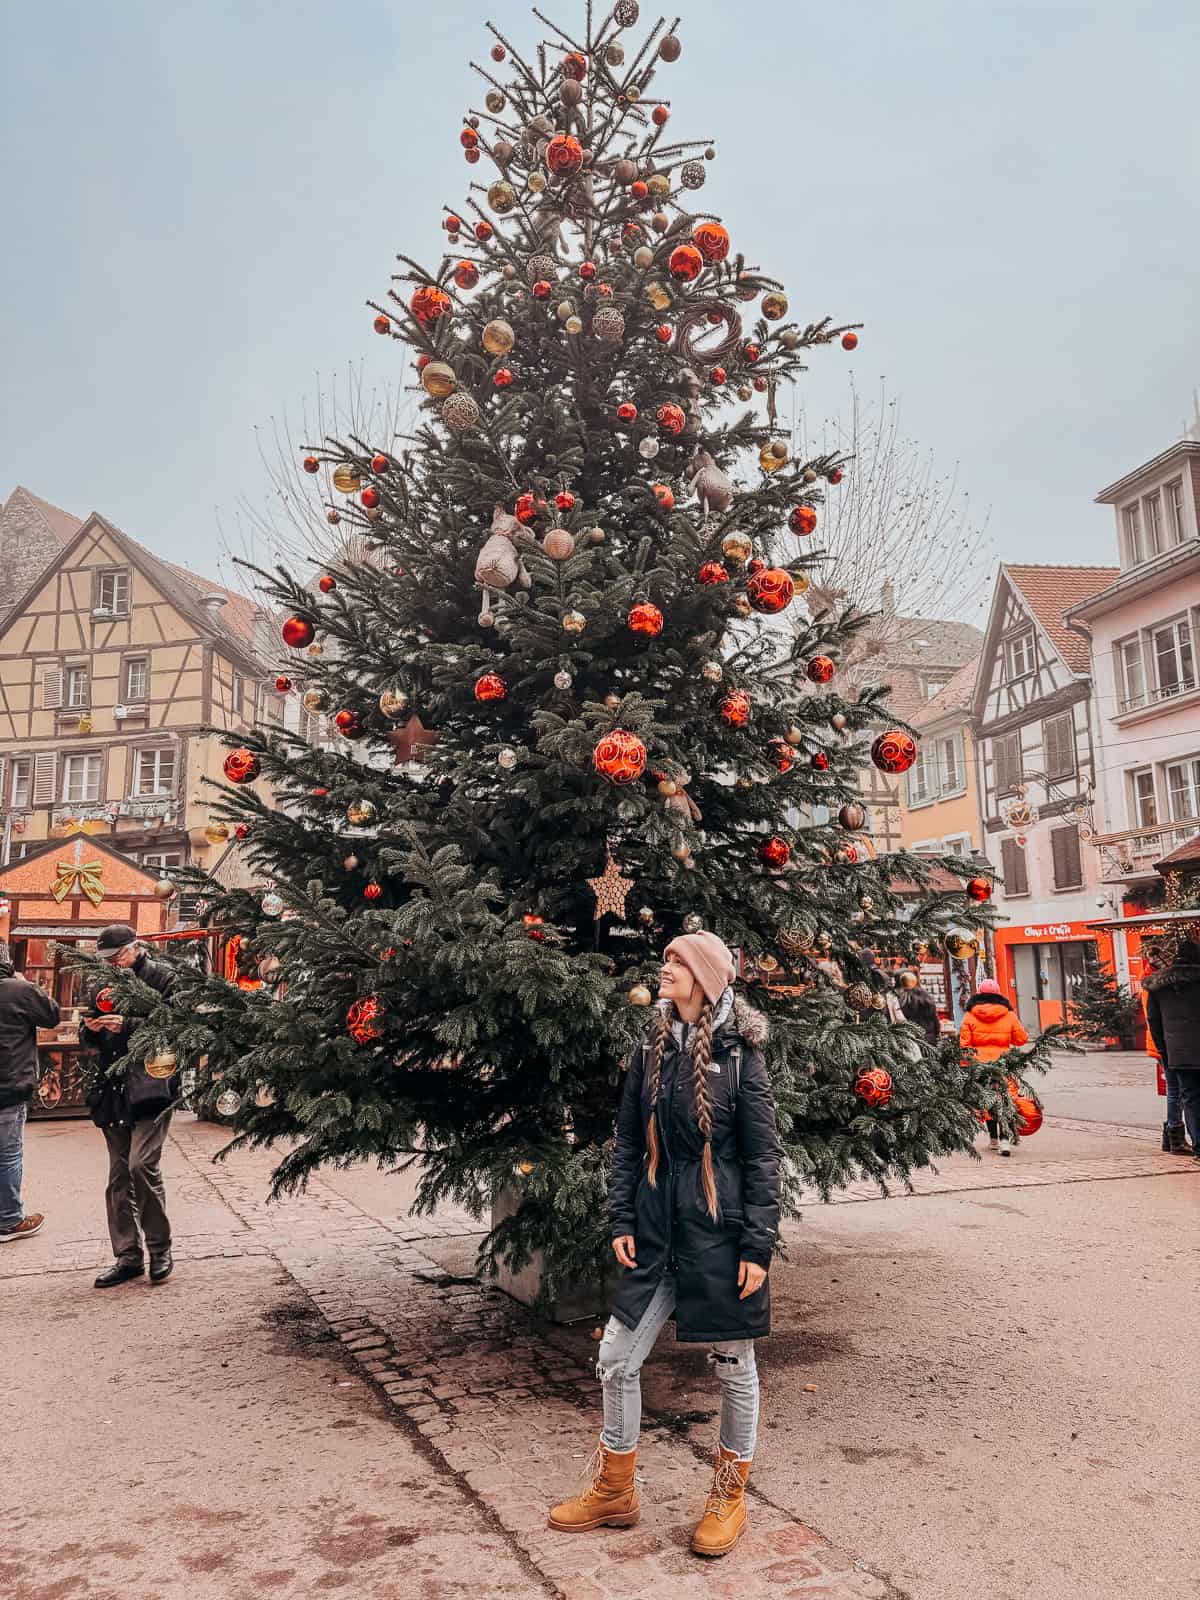 A person stands in awe before a towering Christmas tree beautifully decorated with red and gold ornaments in the festive streets of Colmar.